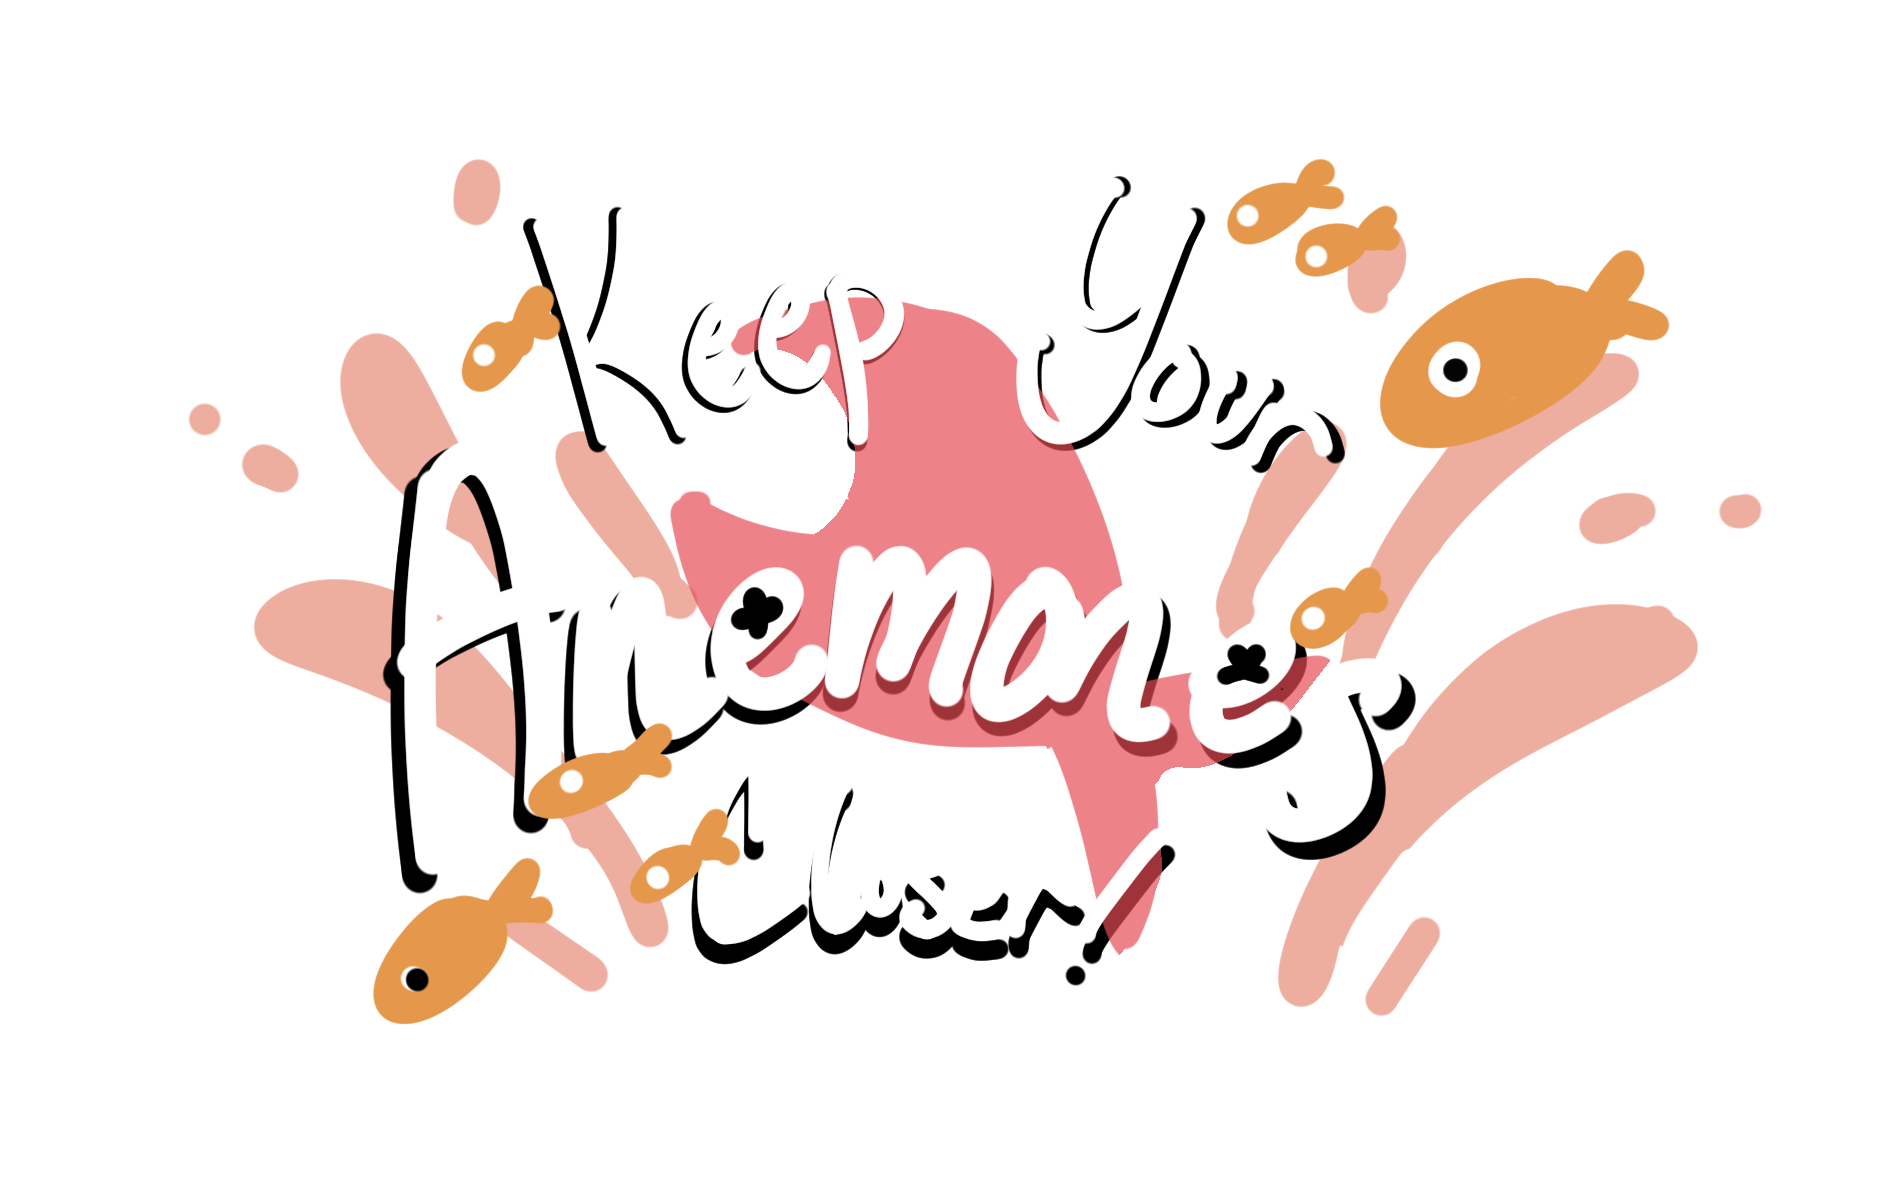 Keep Your Anemones Closer!